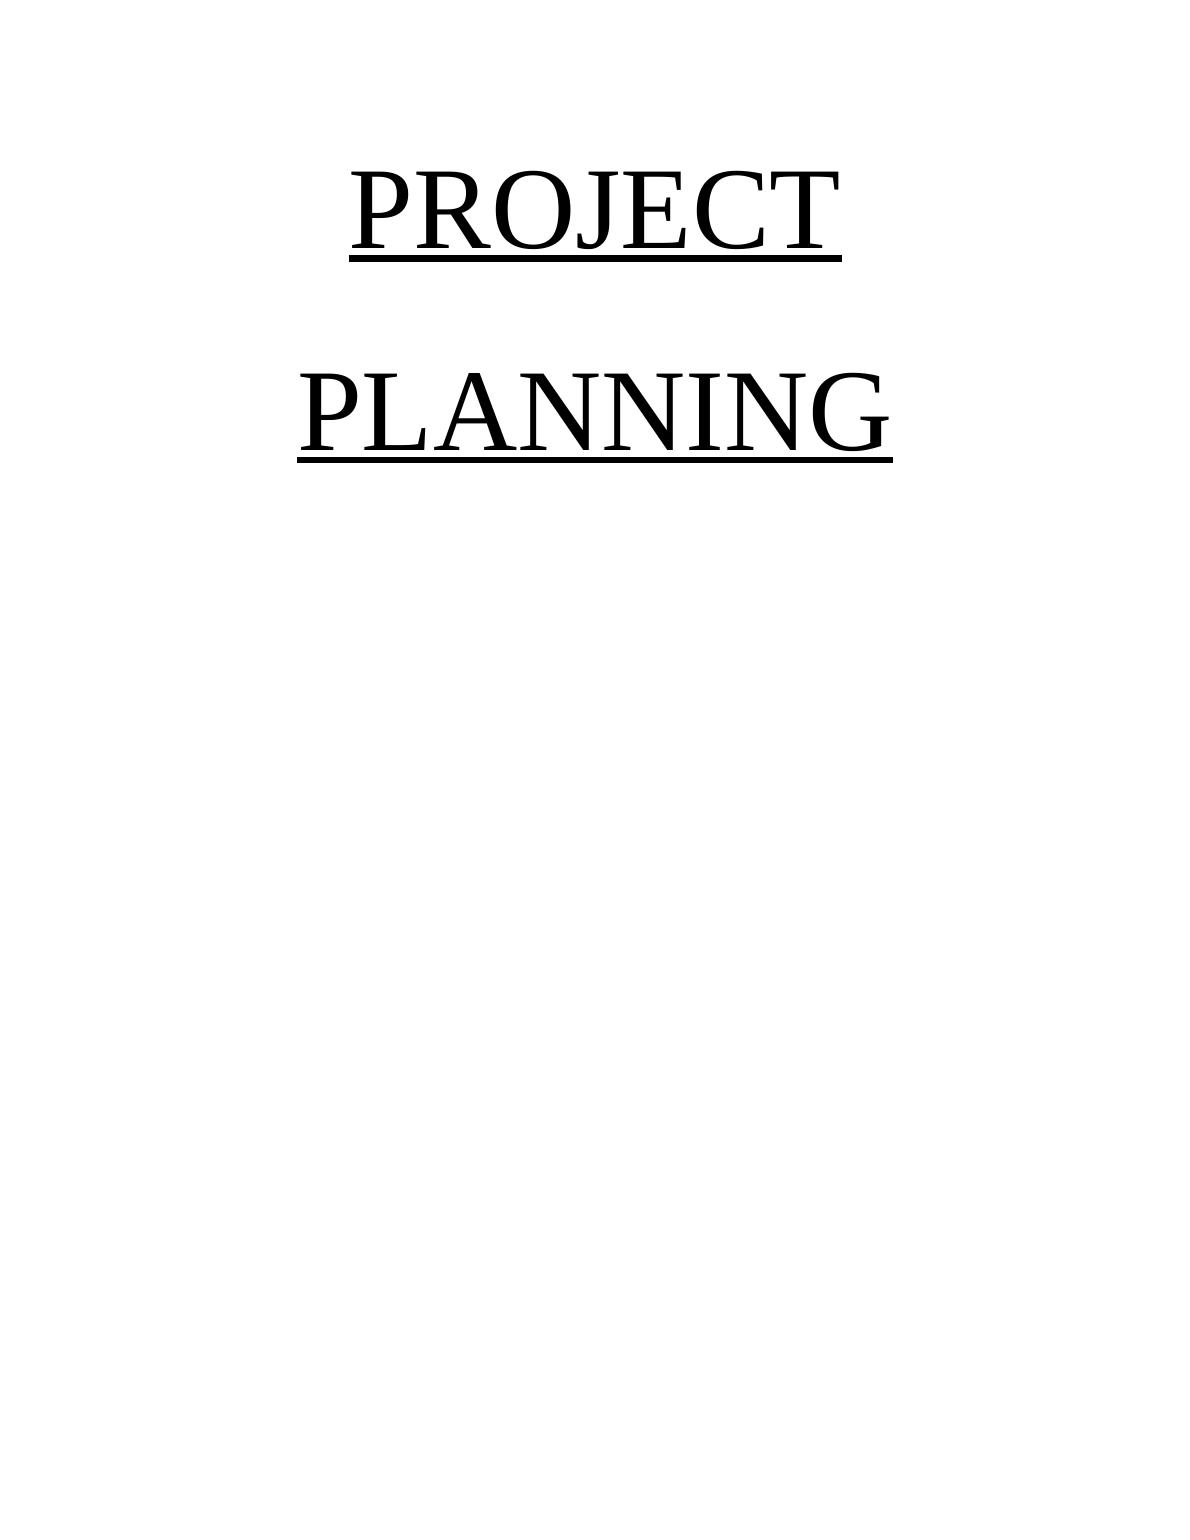 Introduce to Project Planning_1